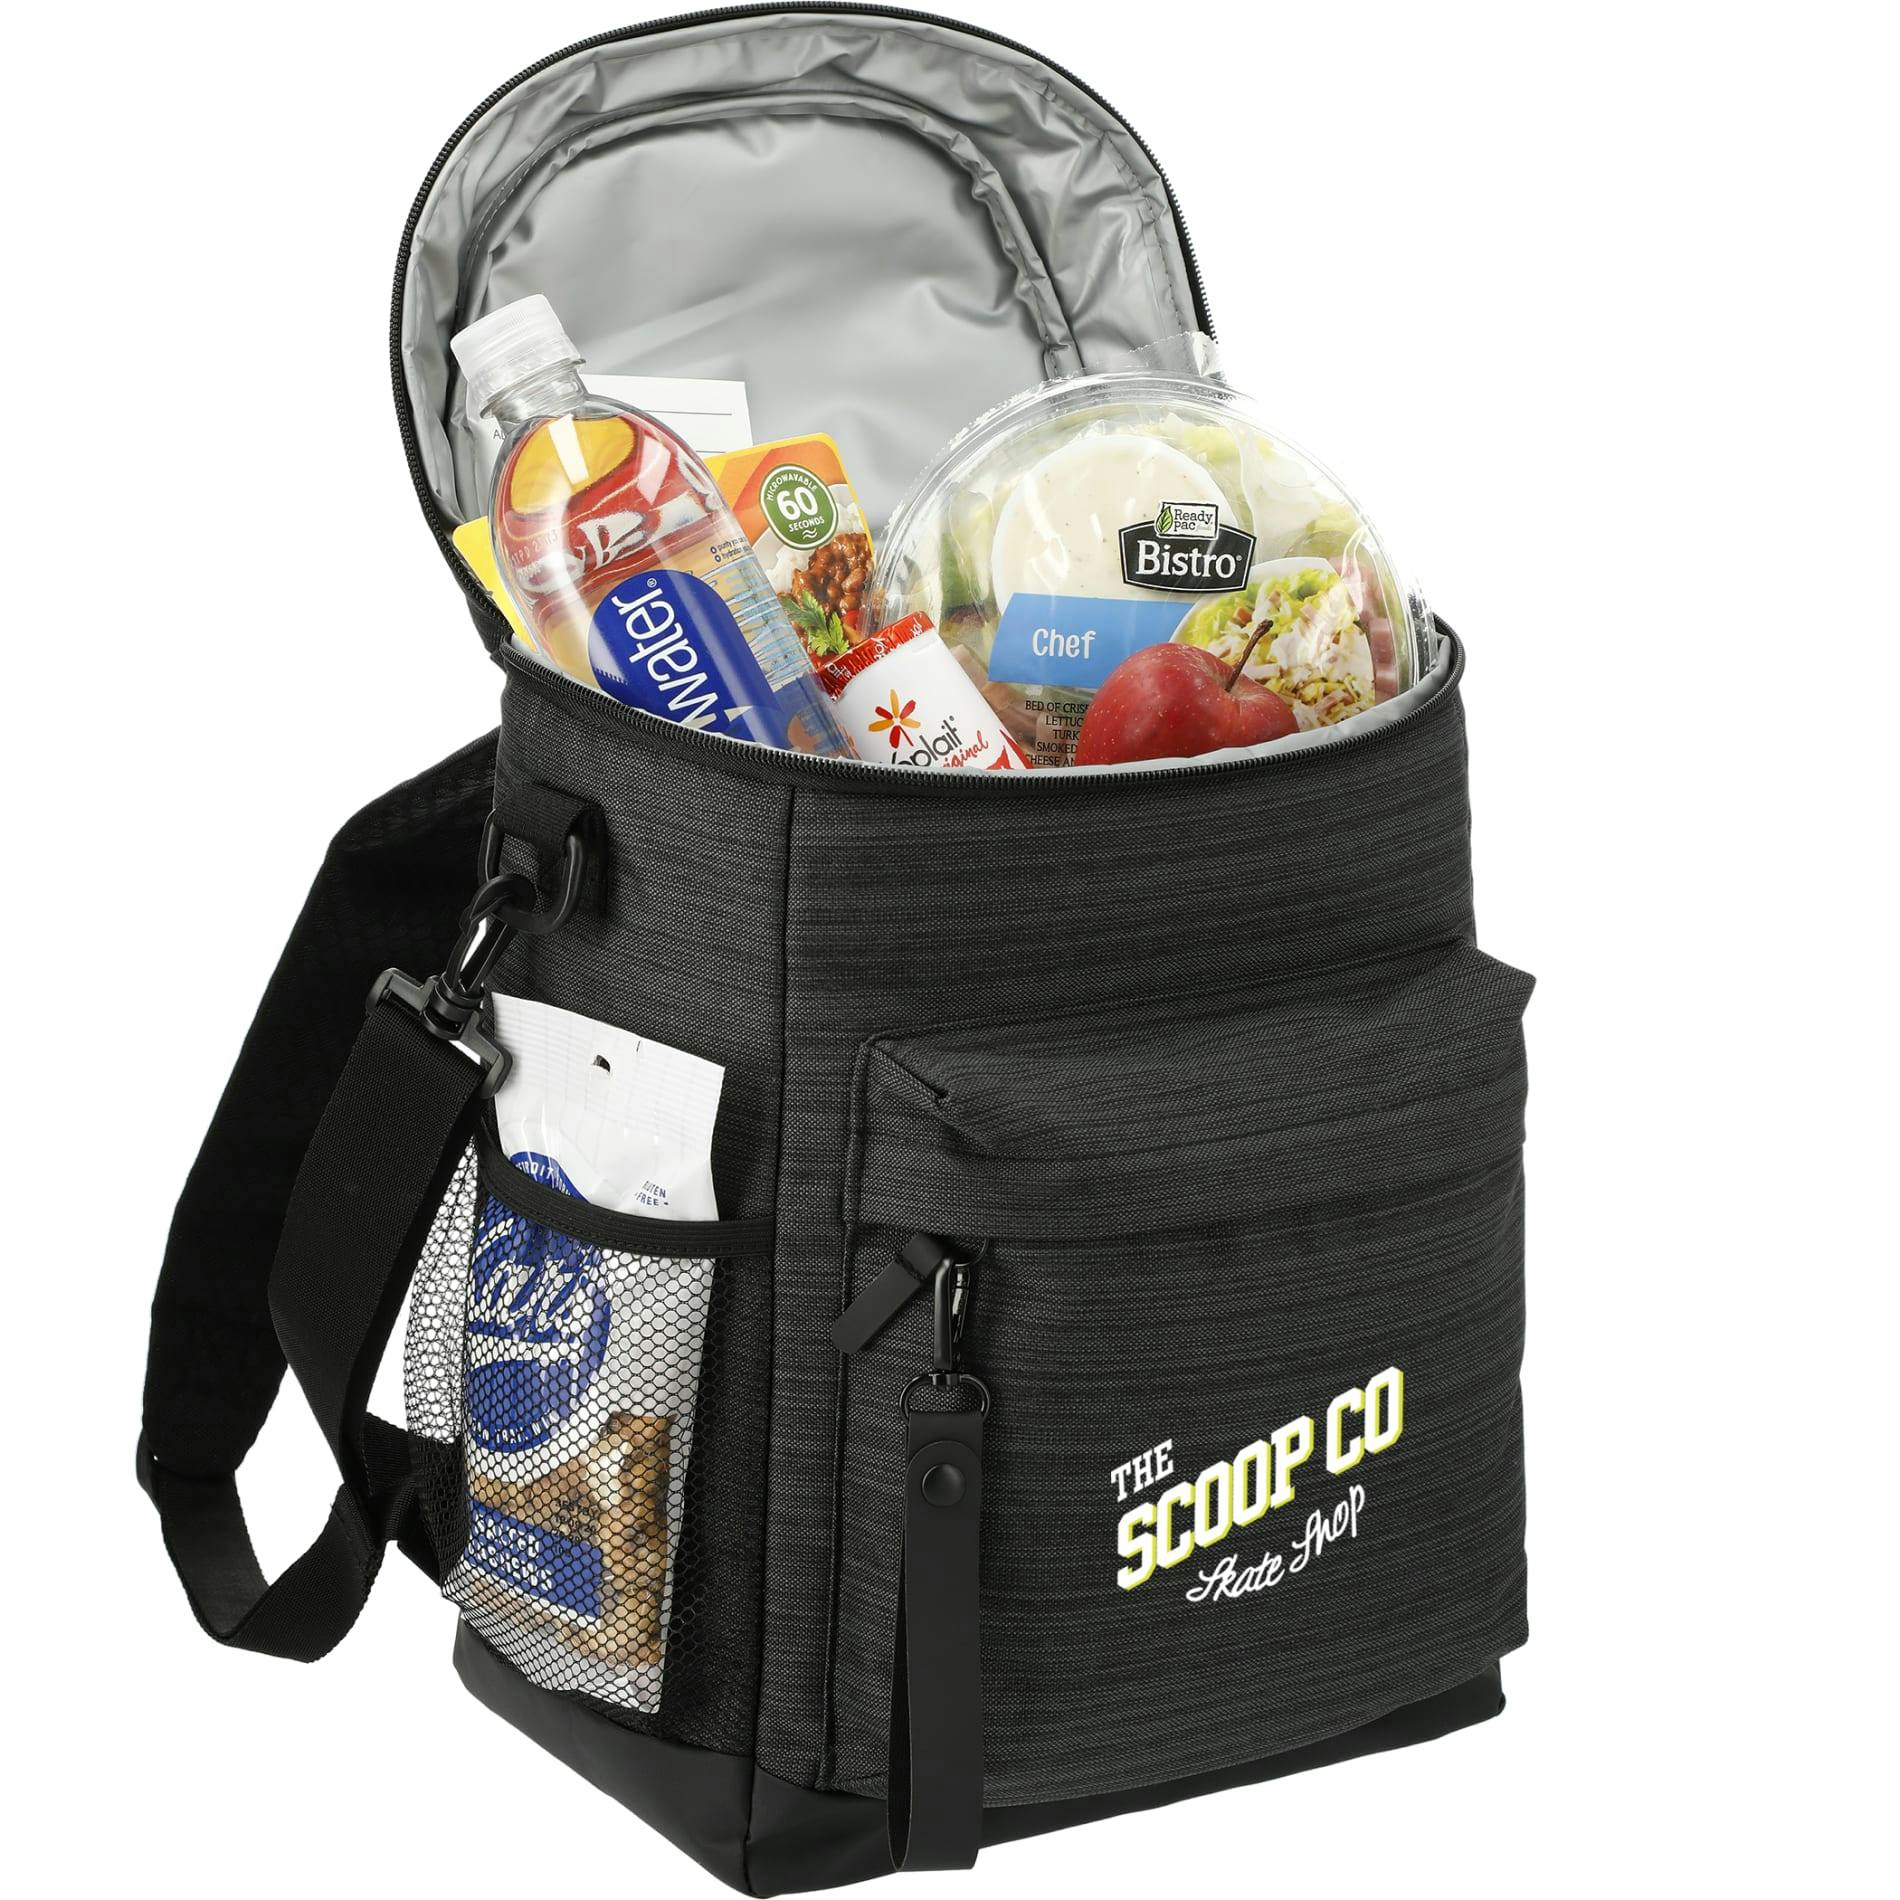 NBN Whitby 24 Can Backpack Cooler - additional Image 2